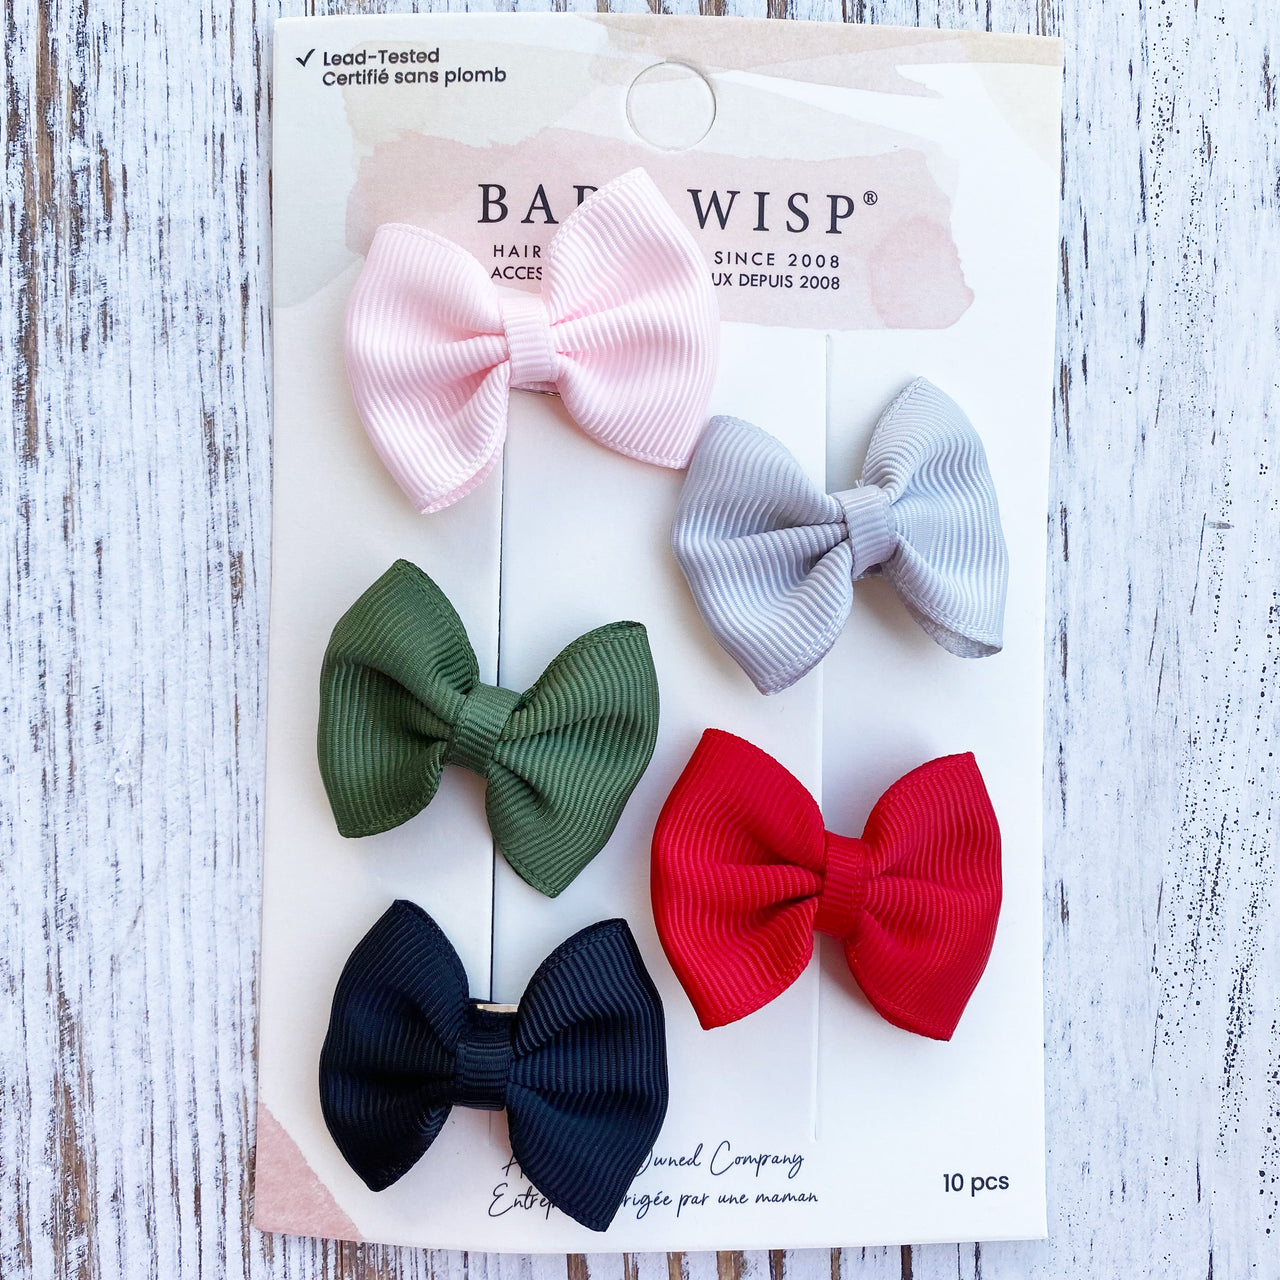 5 Classic Fan Out Bows - Small Snap Clip Gift Set Baby Wisp